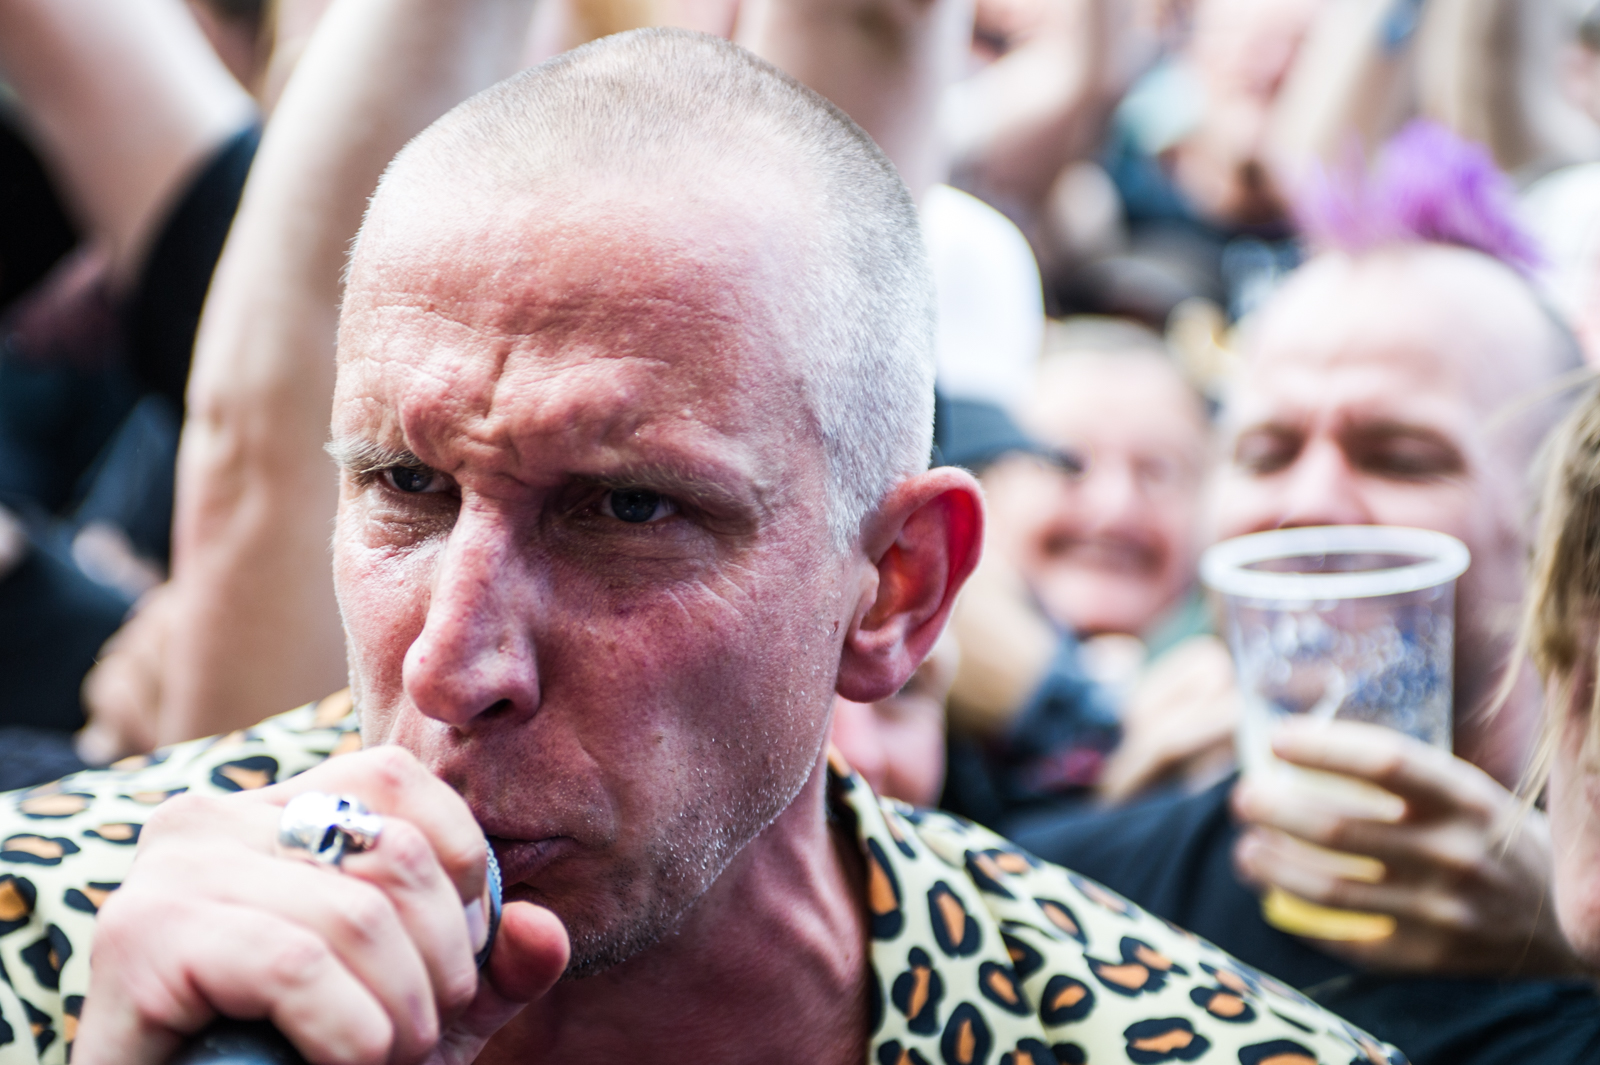 Clawfinger, Copenhell